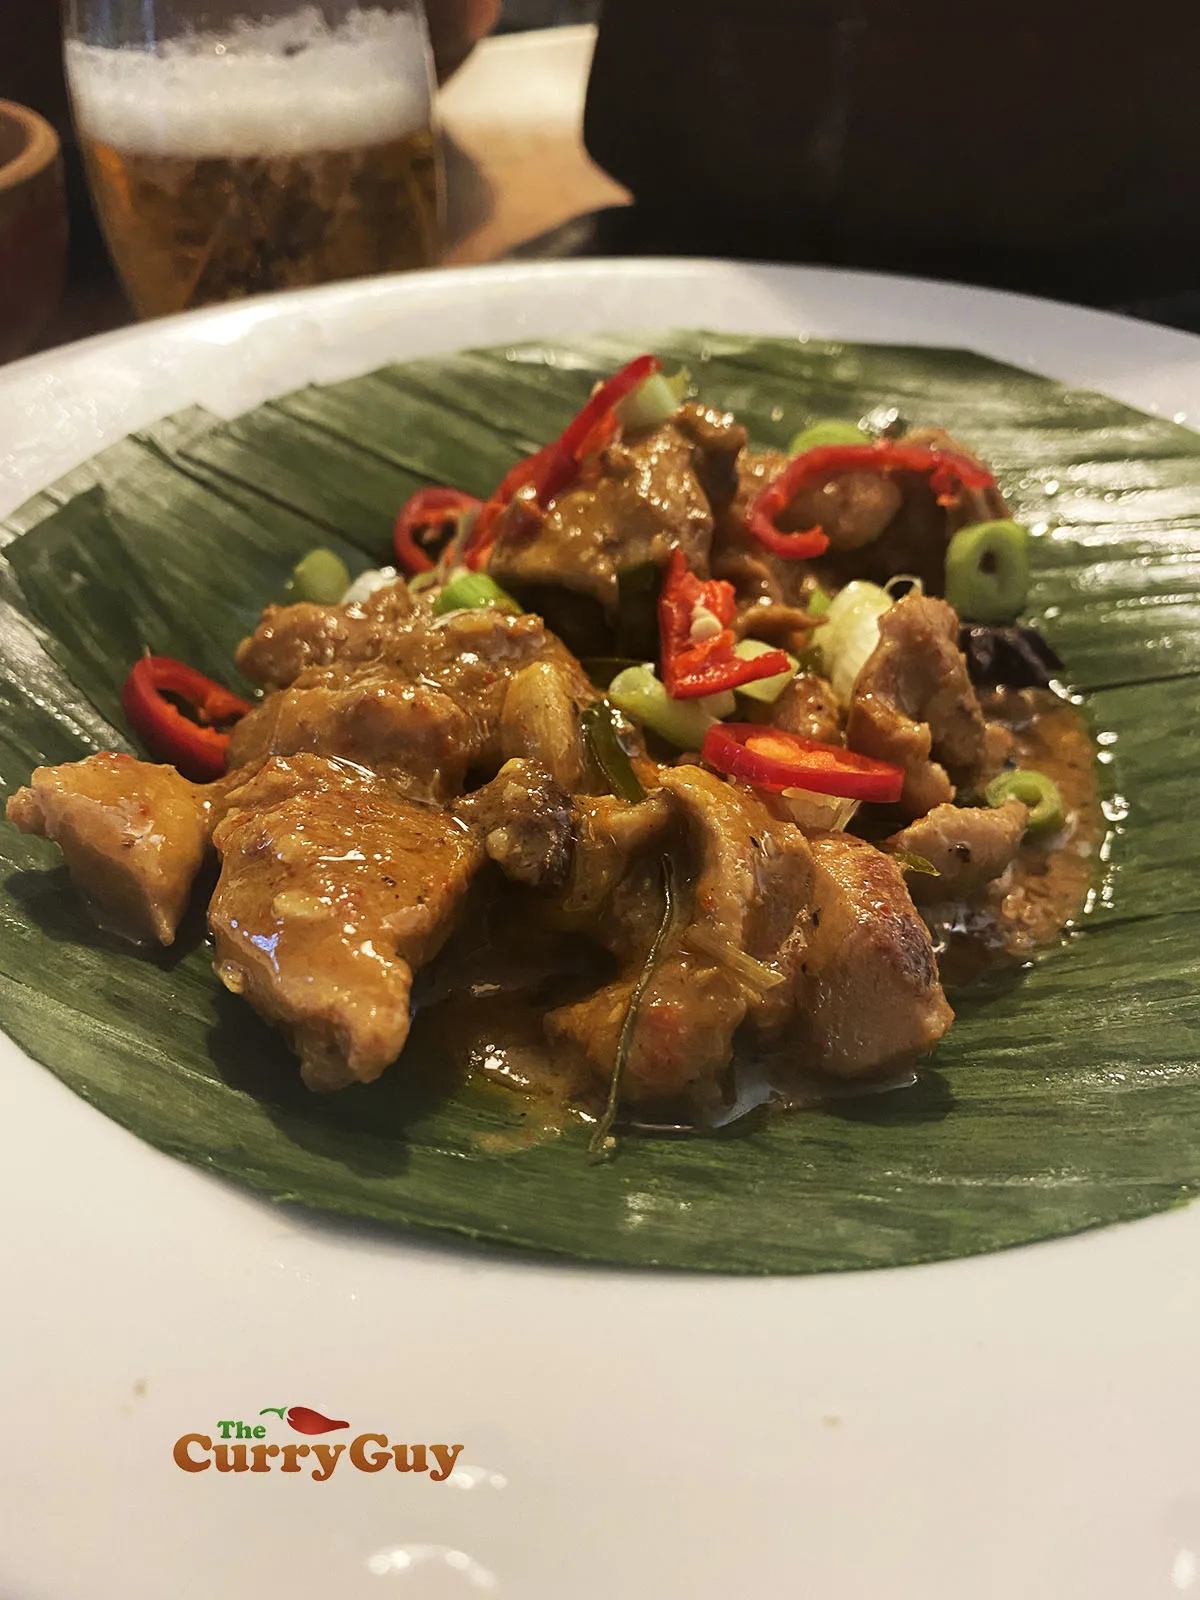 Rendang curry with chicken presented on a banana leaf.